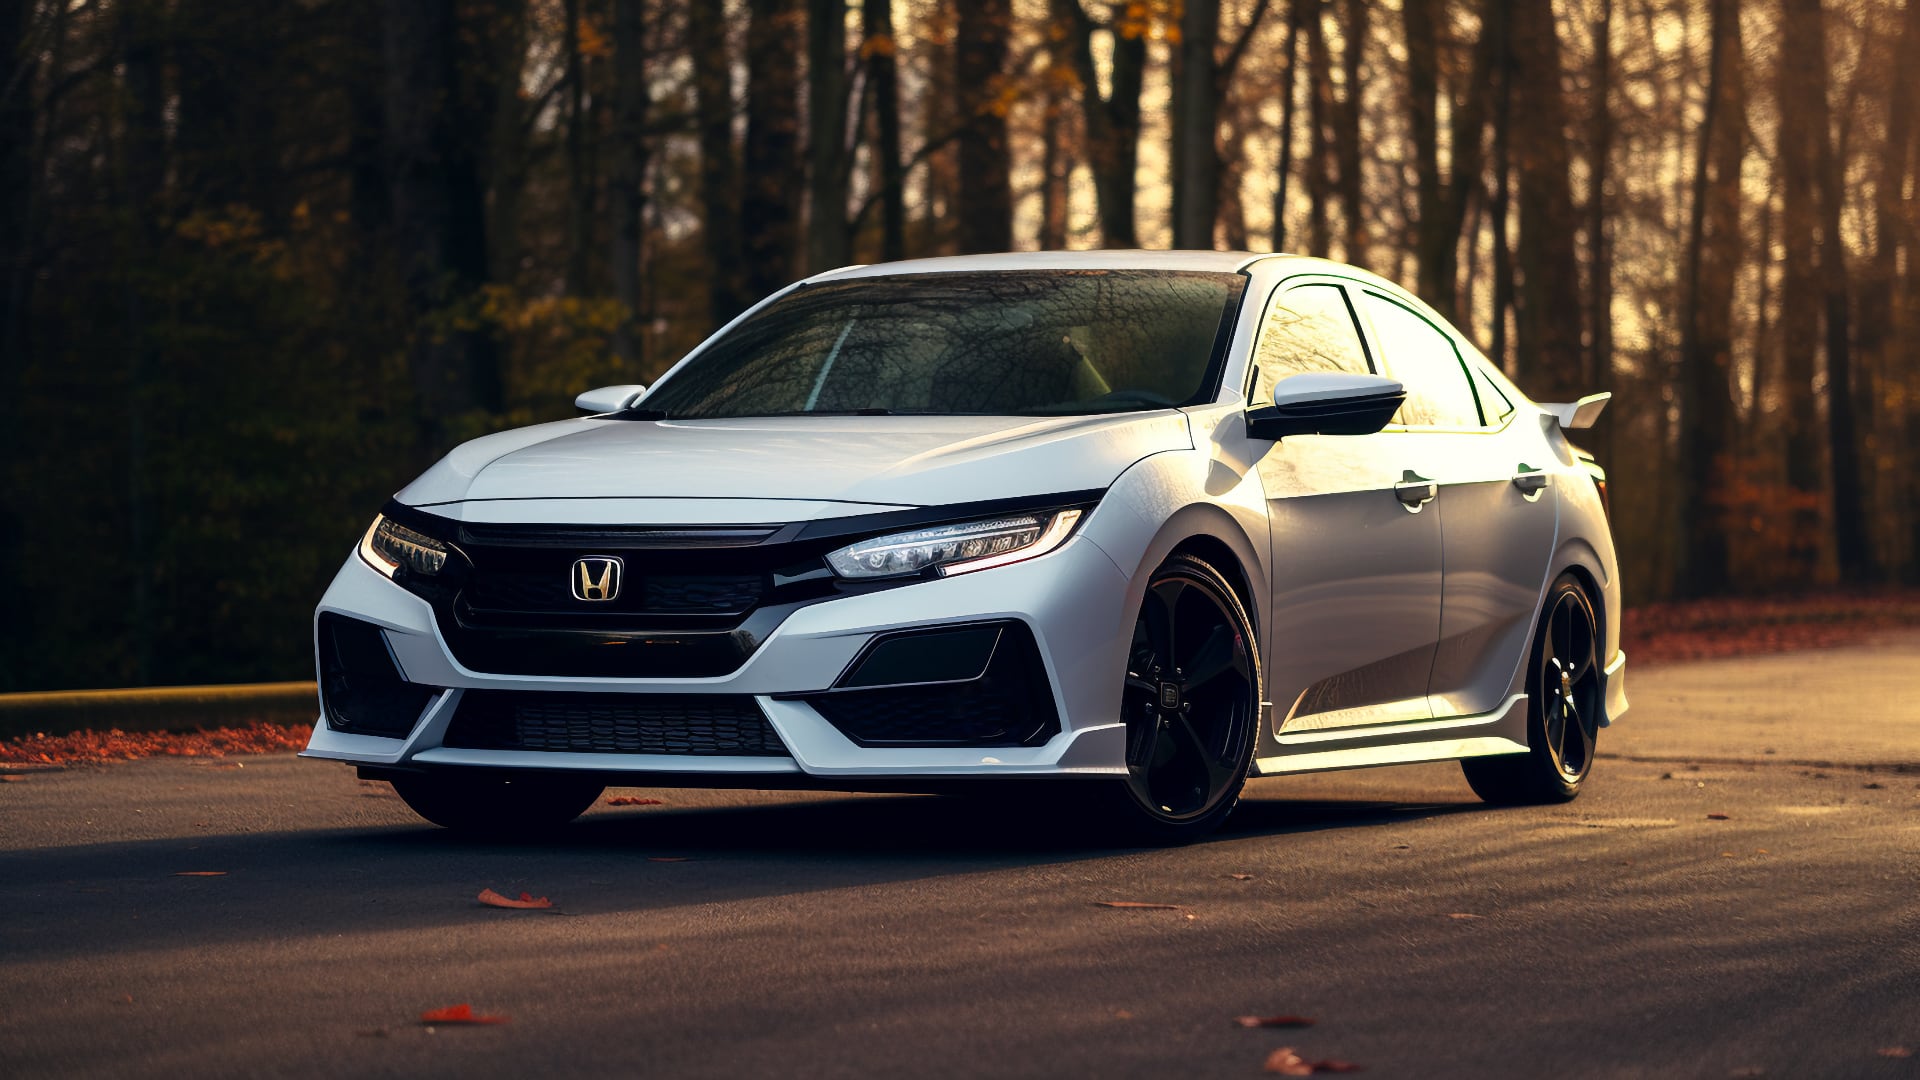 2019 Honda Civic Type R, a standout model in the Honda Civic lineup.